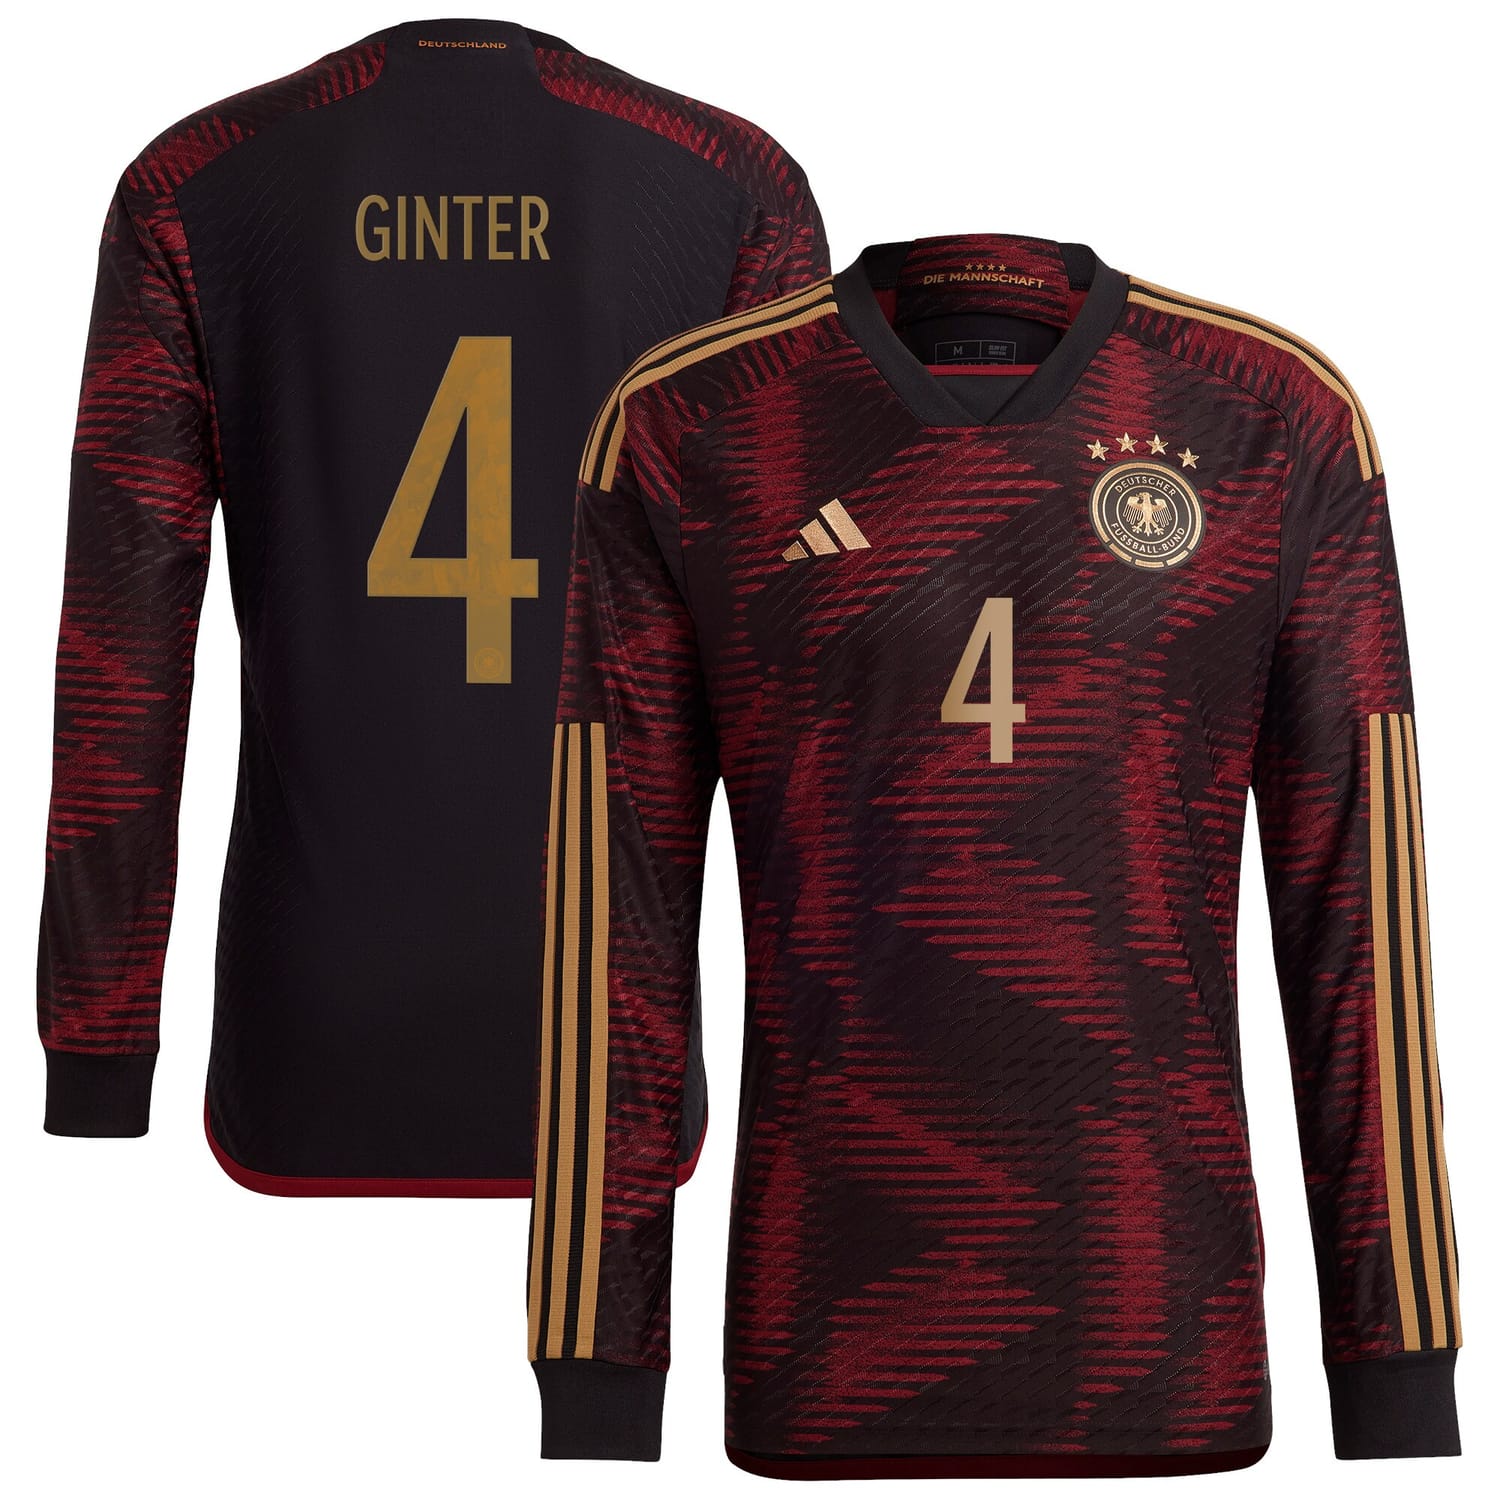 Germany National Team Away Authentic Jersey Shirt Long Sleeve player Matthias Ginter 4 printing for Men